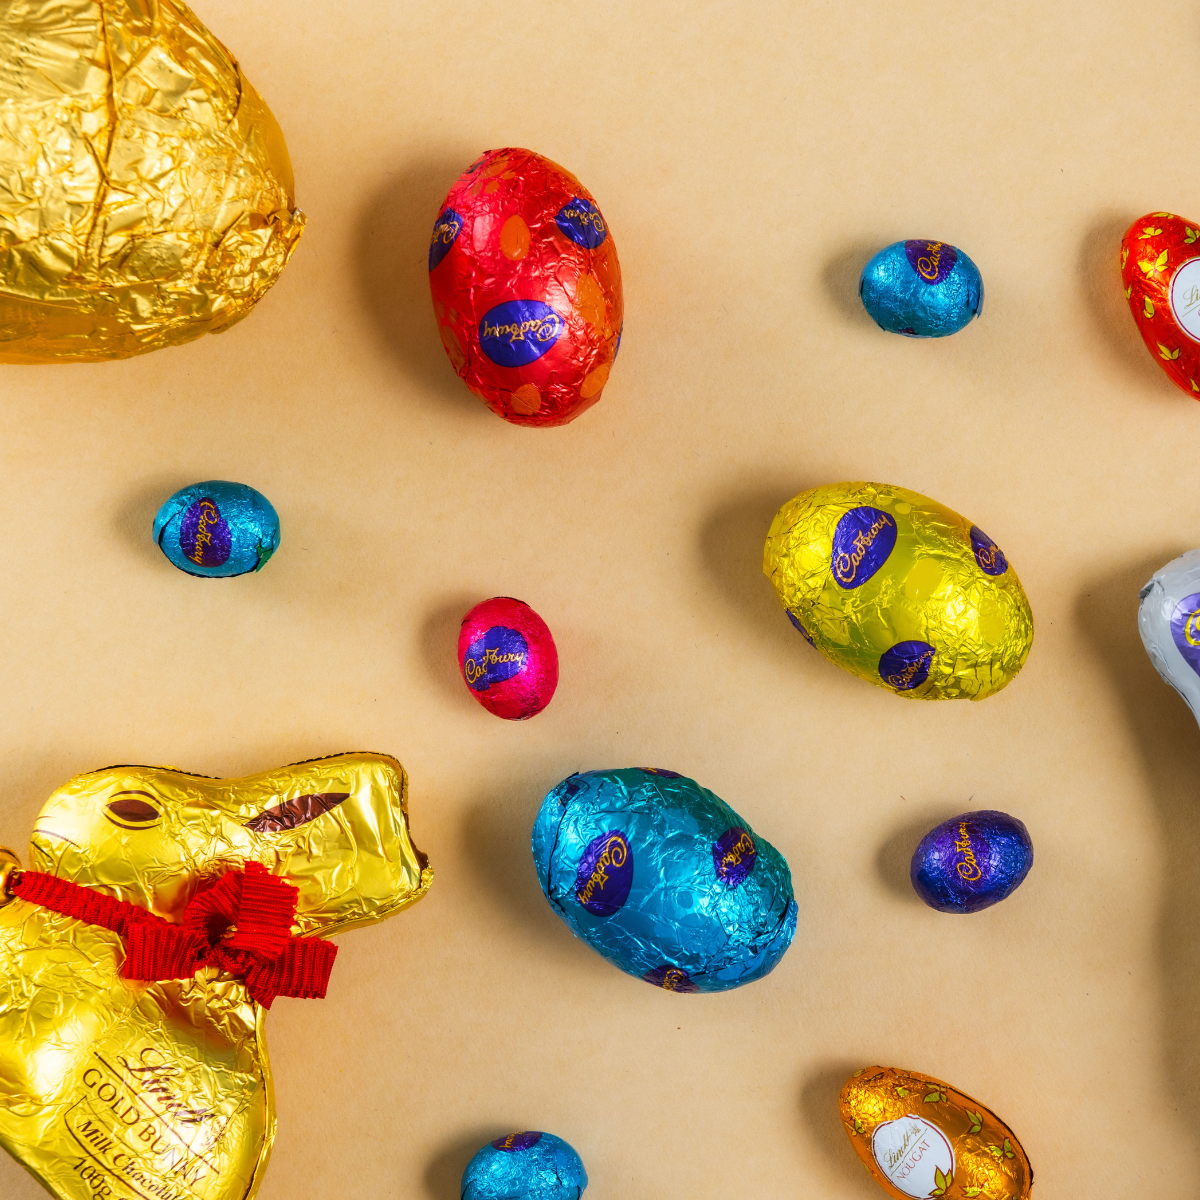 Why does Easter Chocolate Taste so Good?